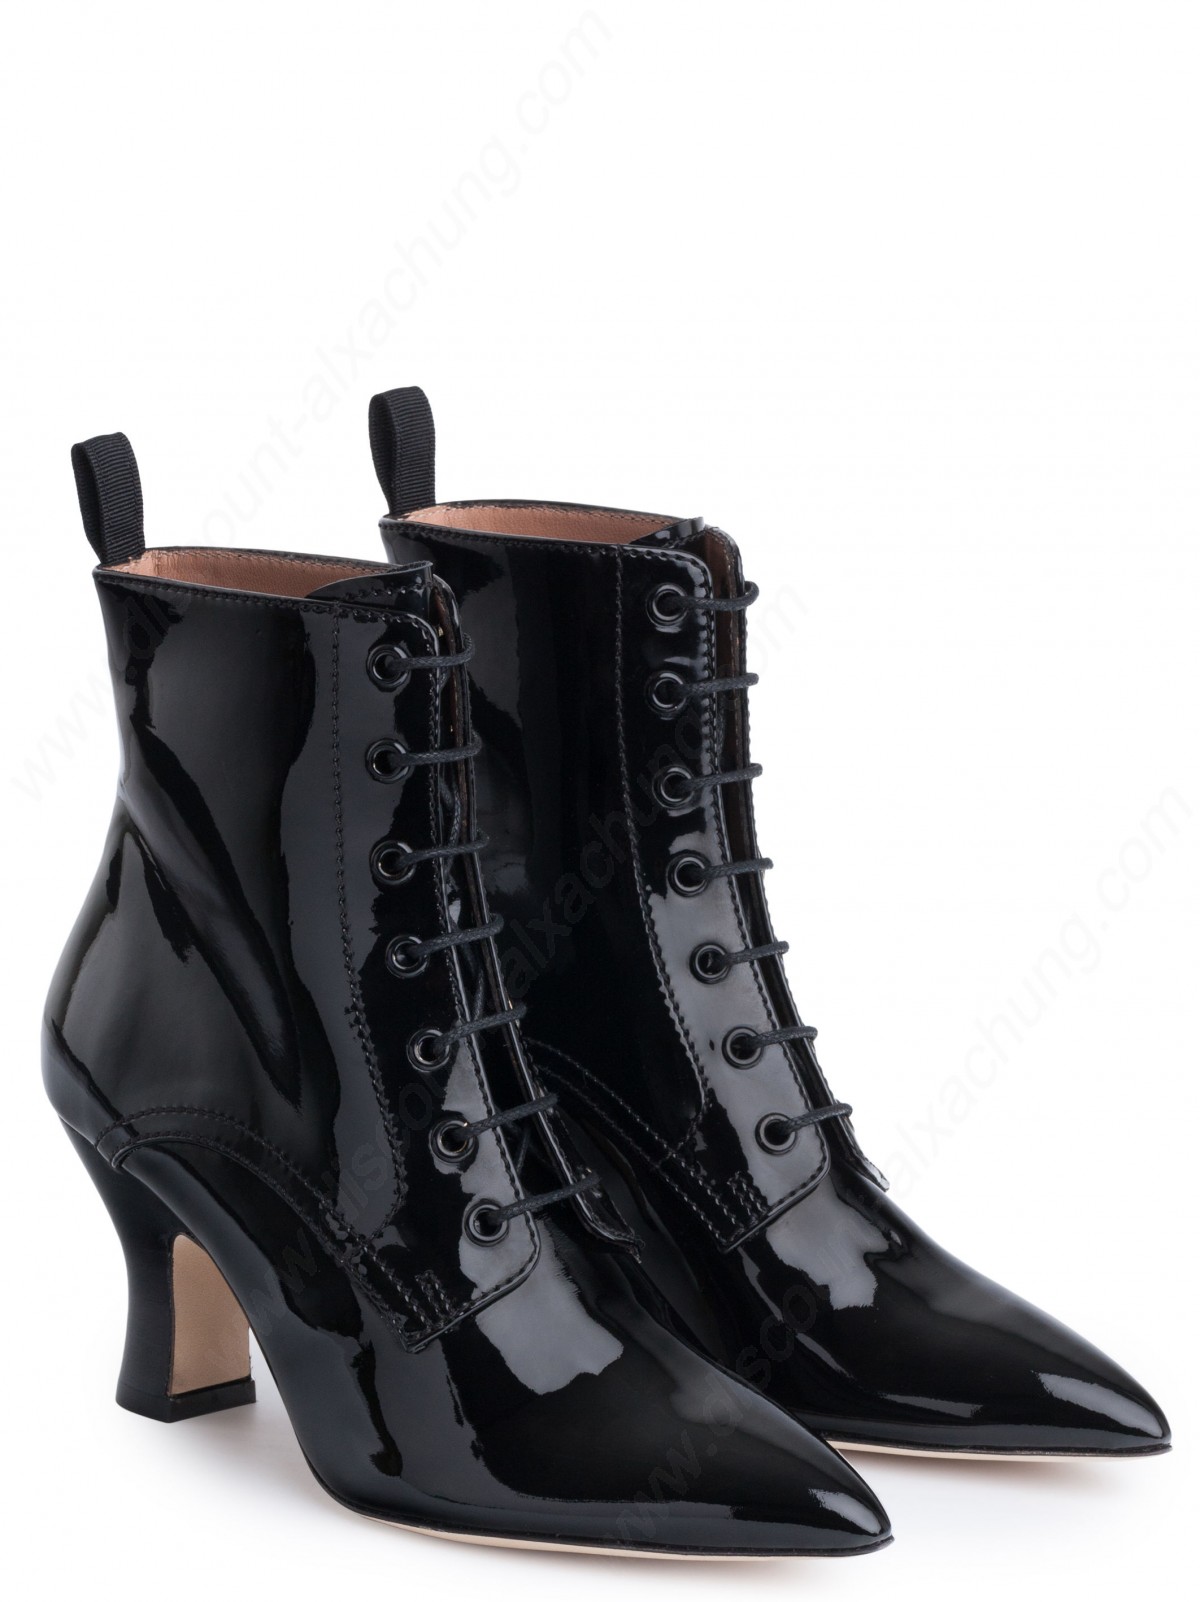 Alexachung Black Victorian Lace Up Boot - -1